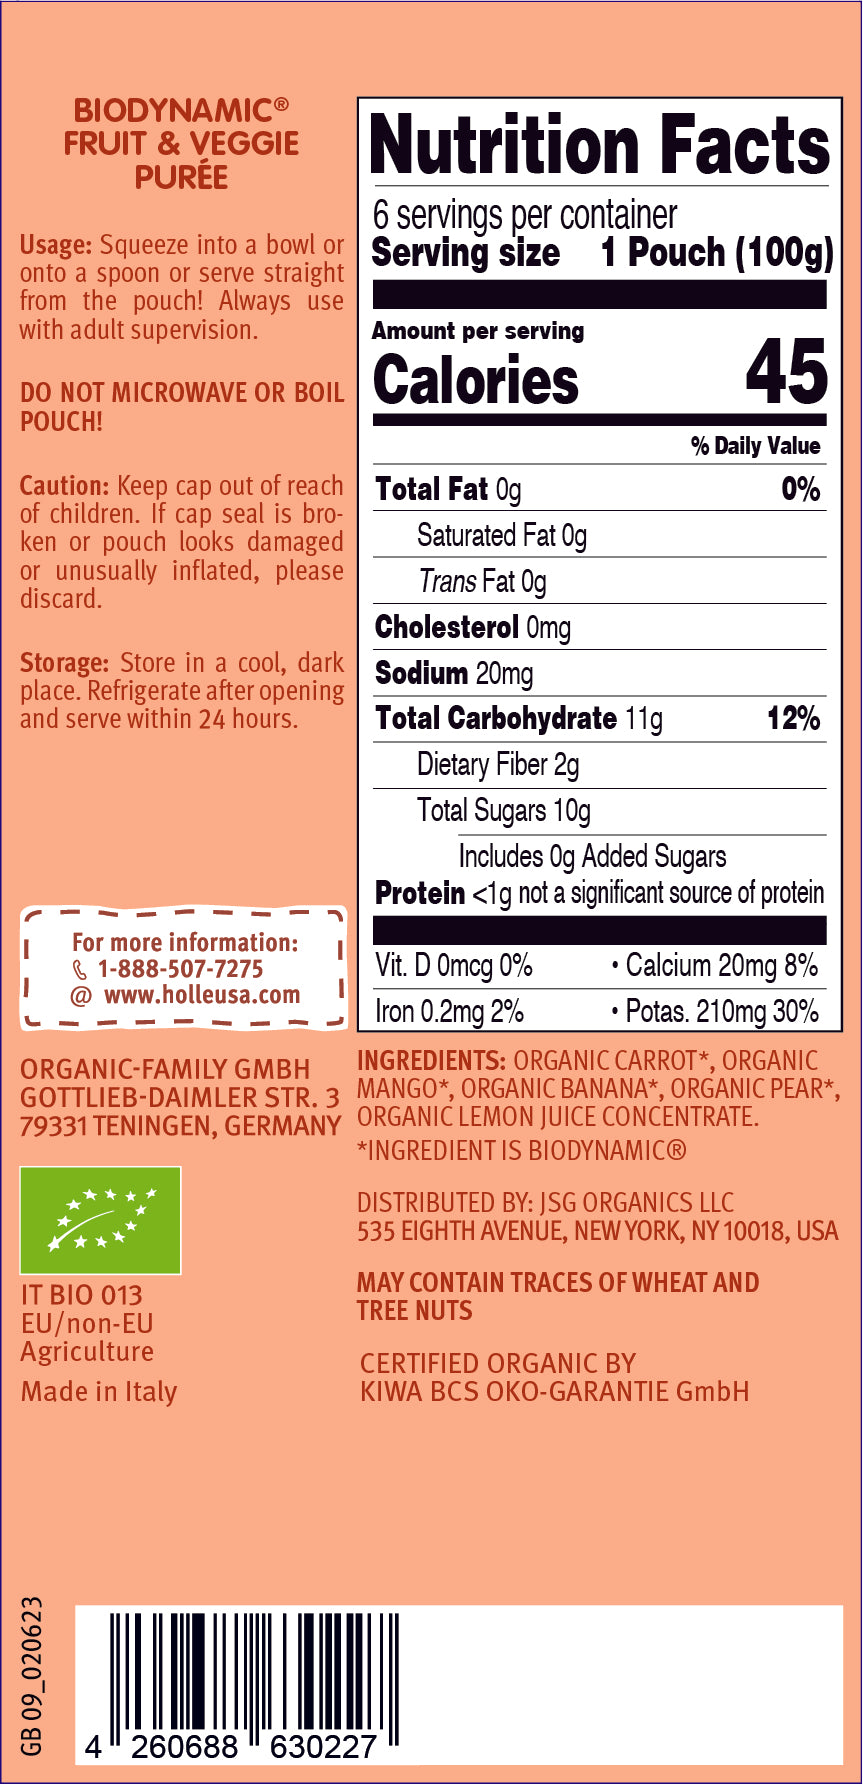 Carrot Cat: nutrition facts and ingredients